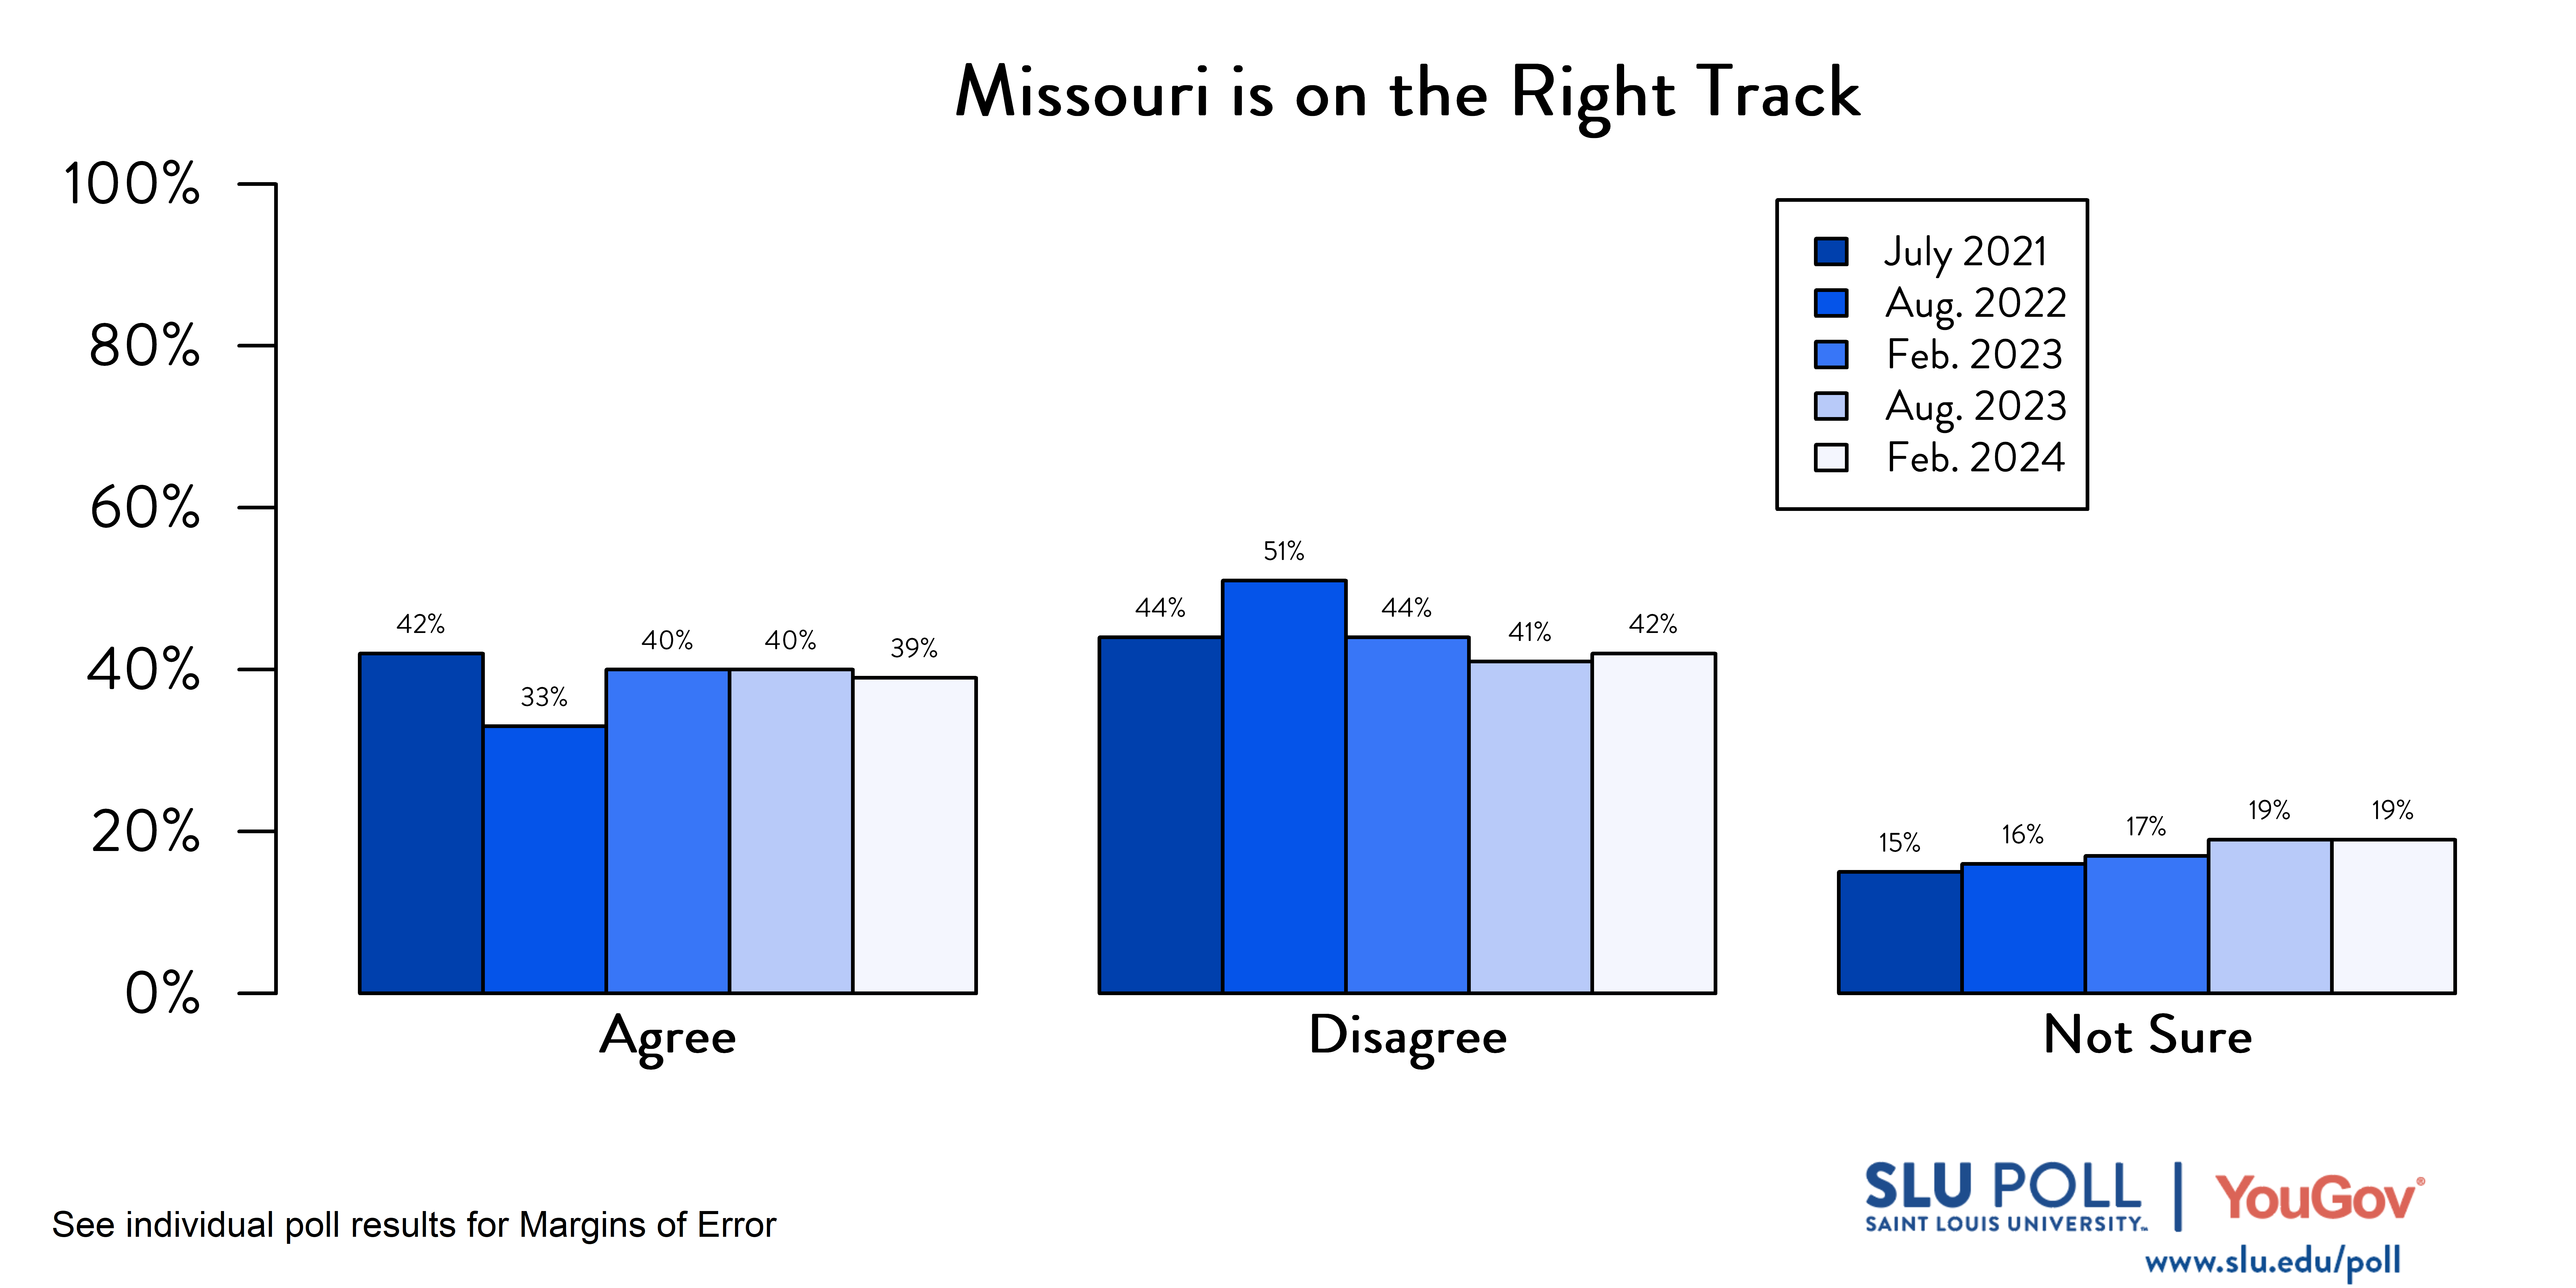 Likely voters' responses to 'Do you agree or disagree with the following statements…The State of Missouri is on the right track and headed in a good direction?'. July 2021 Voter Responses: 42% Agree, 44% Disagree, and 15% Not sure. August 2022 Voter Responses: 33% Agree, 51% Disagree, and 16% Not Sure. February 2023 Voter Responses: 40% Agree, 44% Disagree, and 17% Not sure. August 2023 Voter Responses: 40% Agree, 41% Disagree, and 19% Not Sure. February 2024 Voter Responses: 39% Agree, 42% Disagree, and 19% Not Sure.